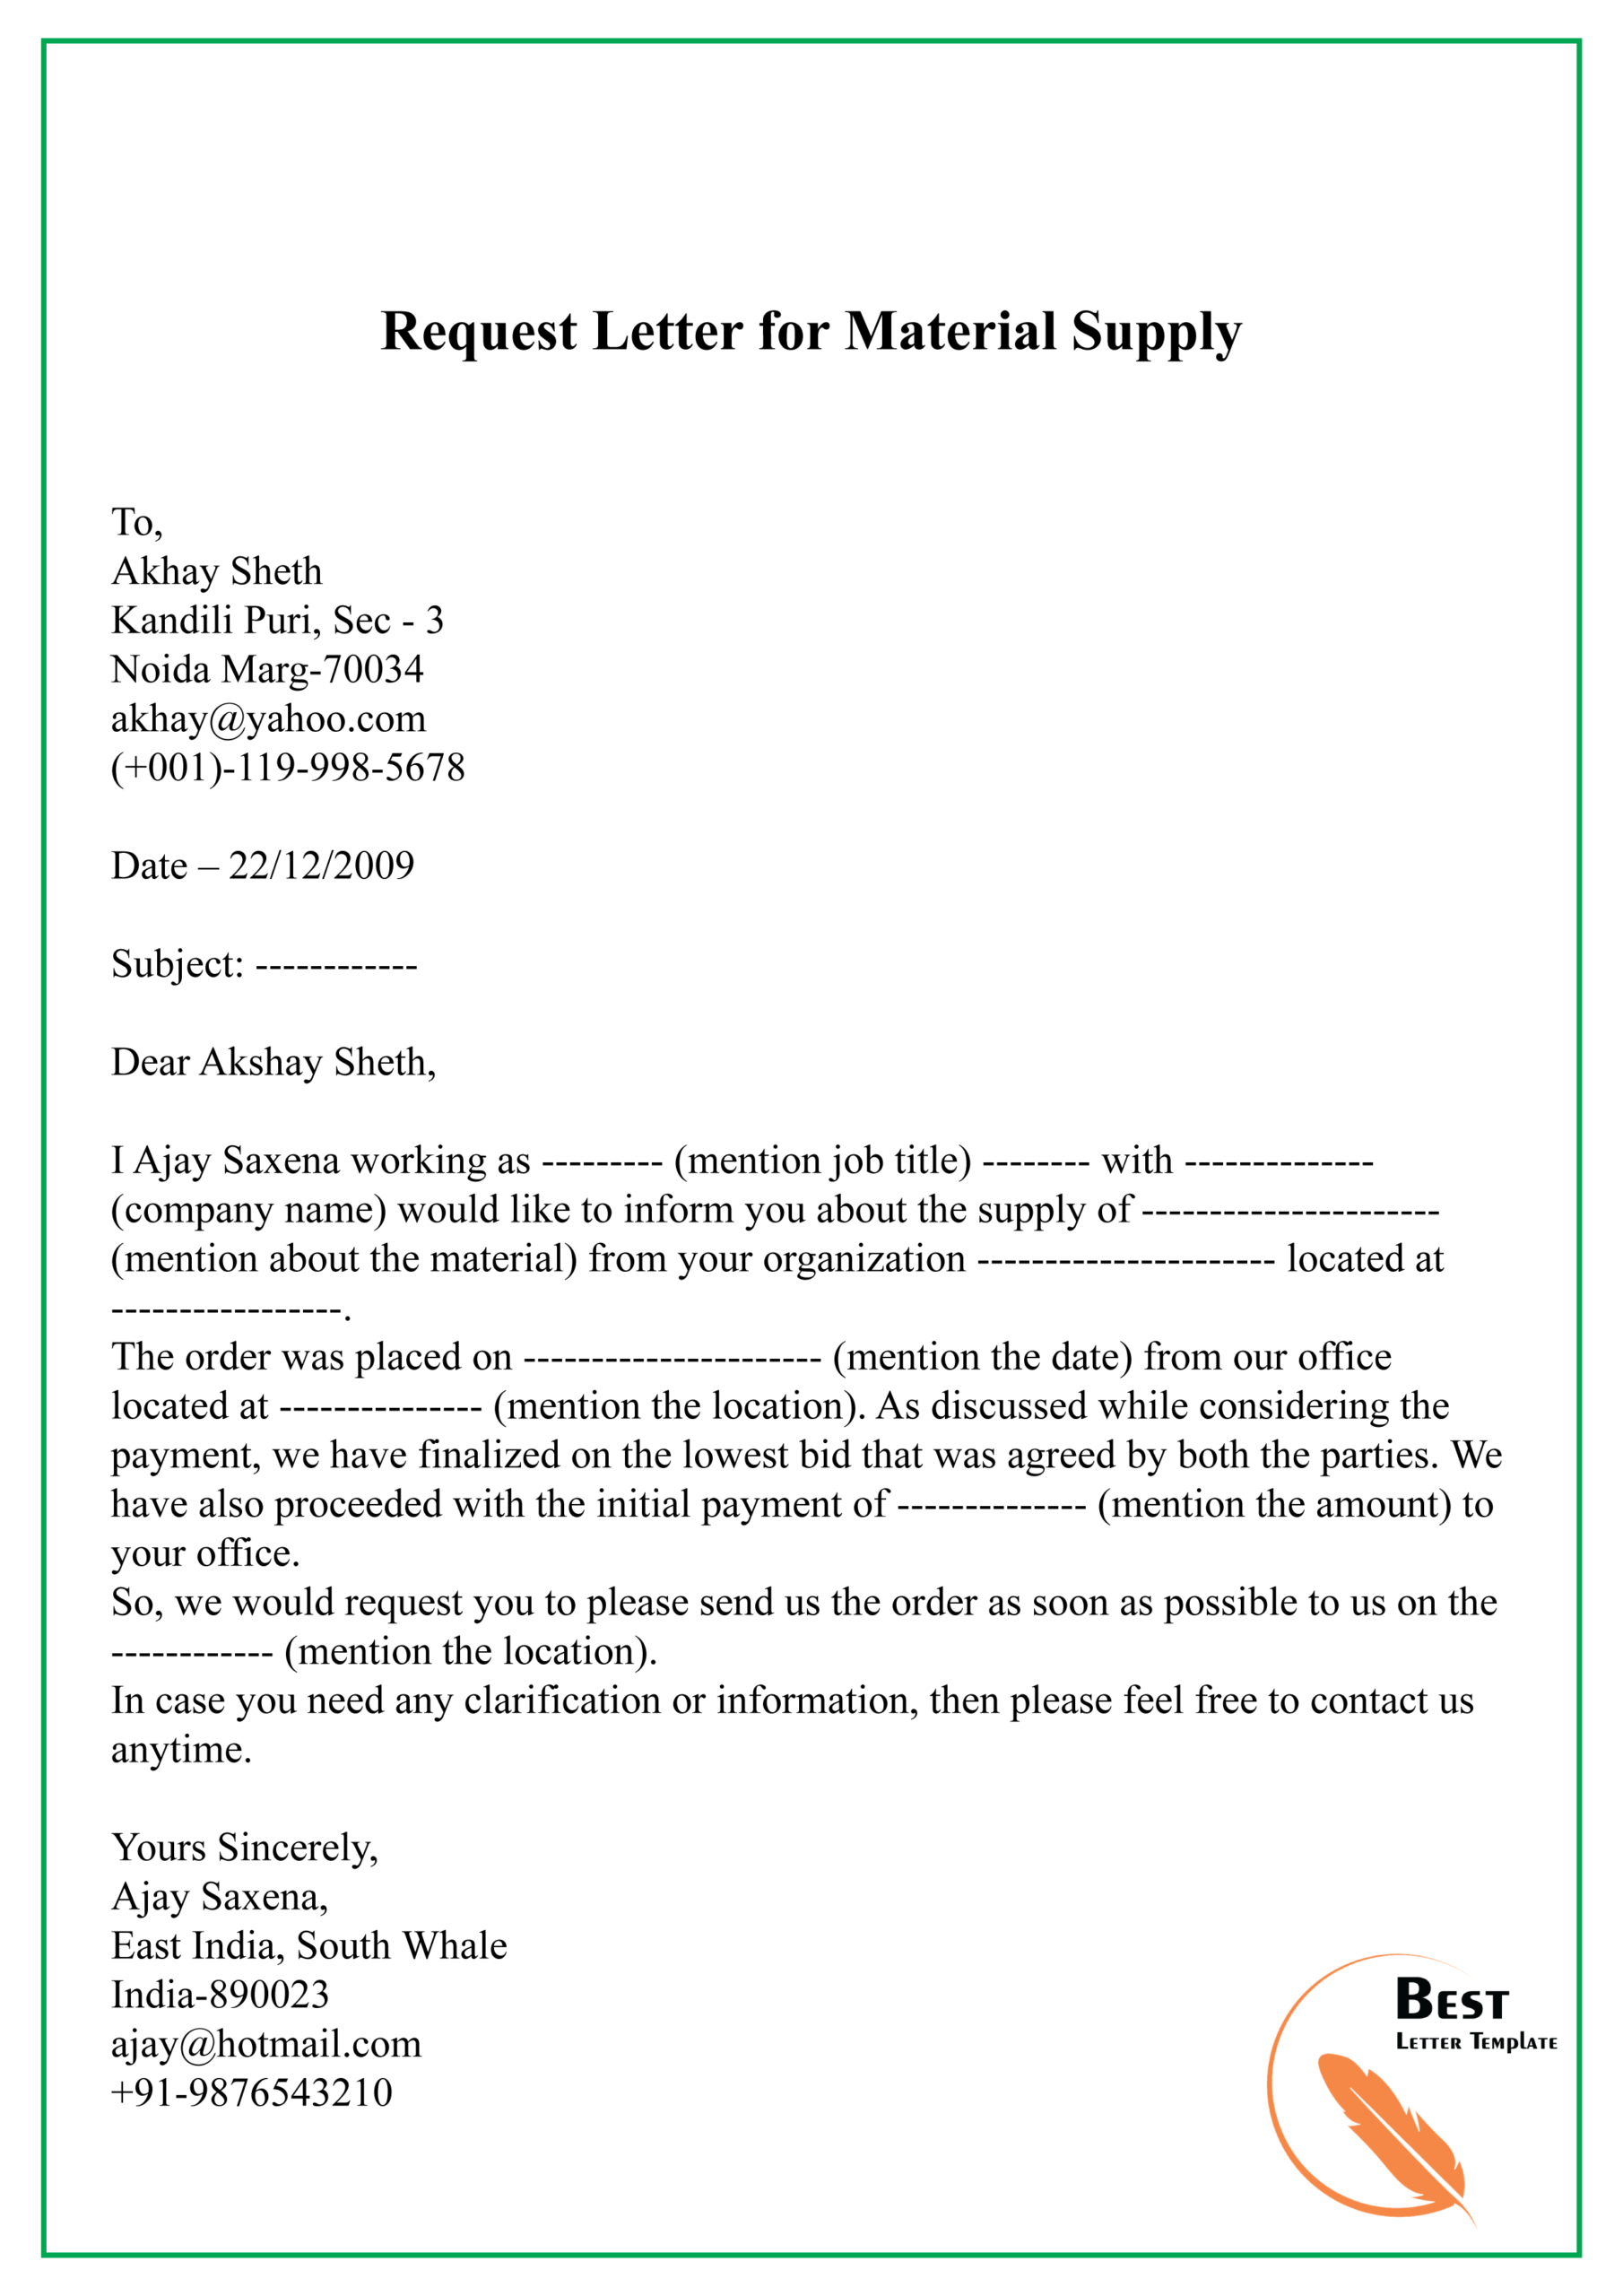 Request Letter For Material Supply 01 | Best Letter Template Pertaining To Material Letters Template